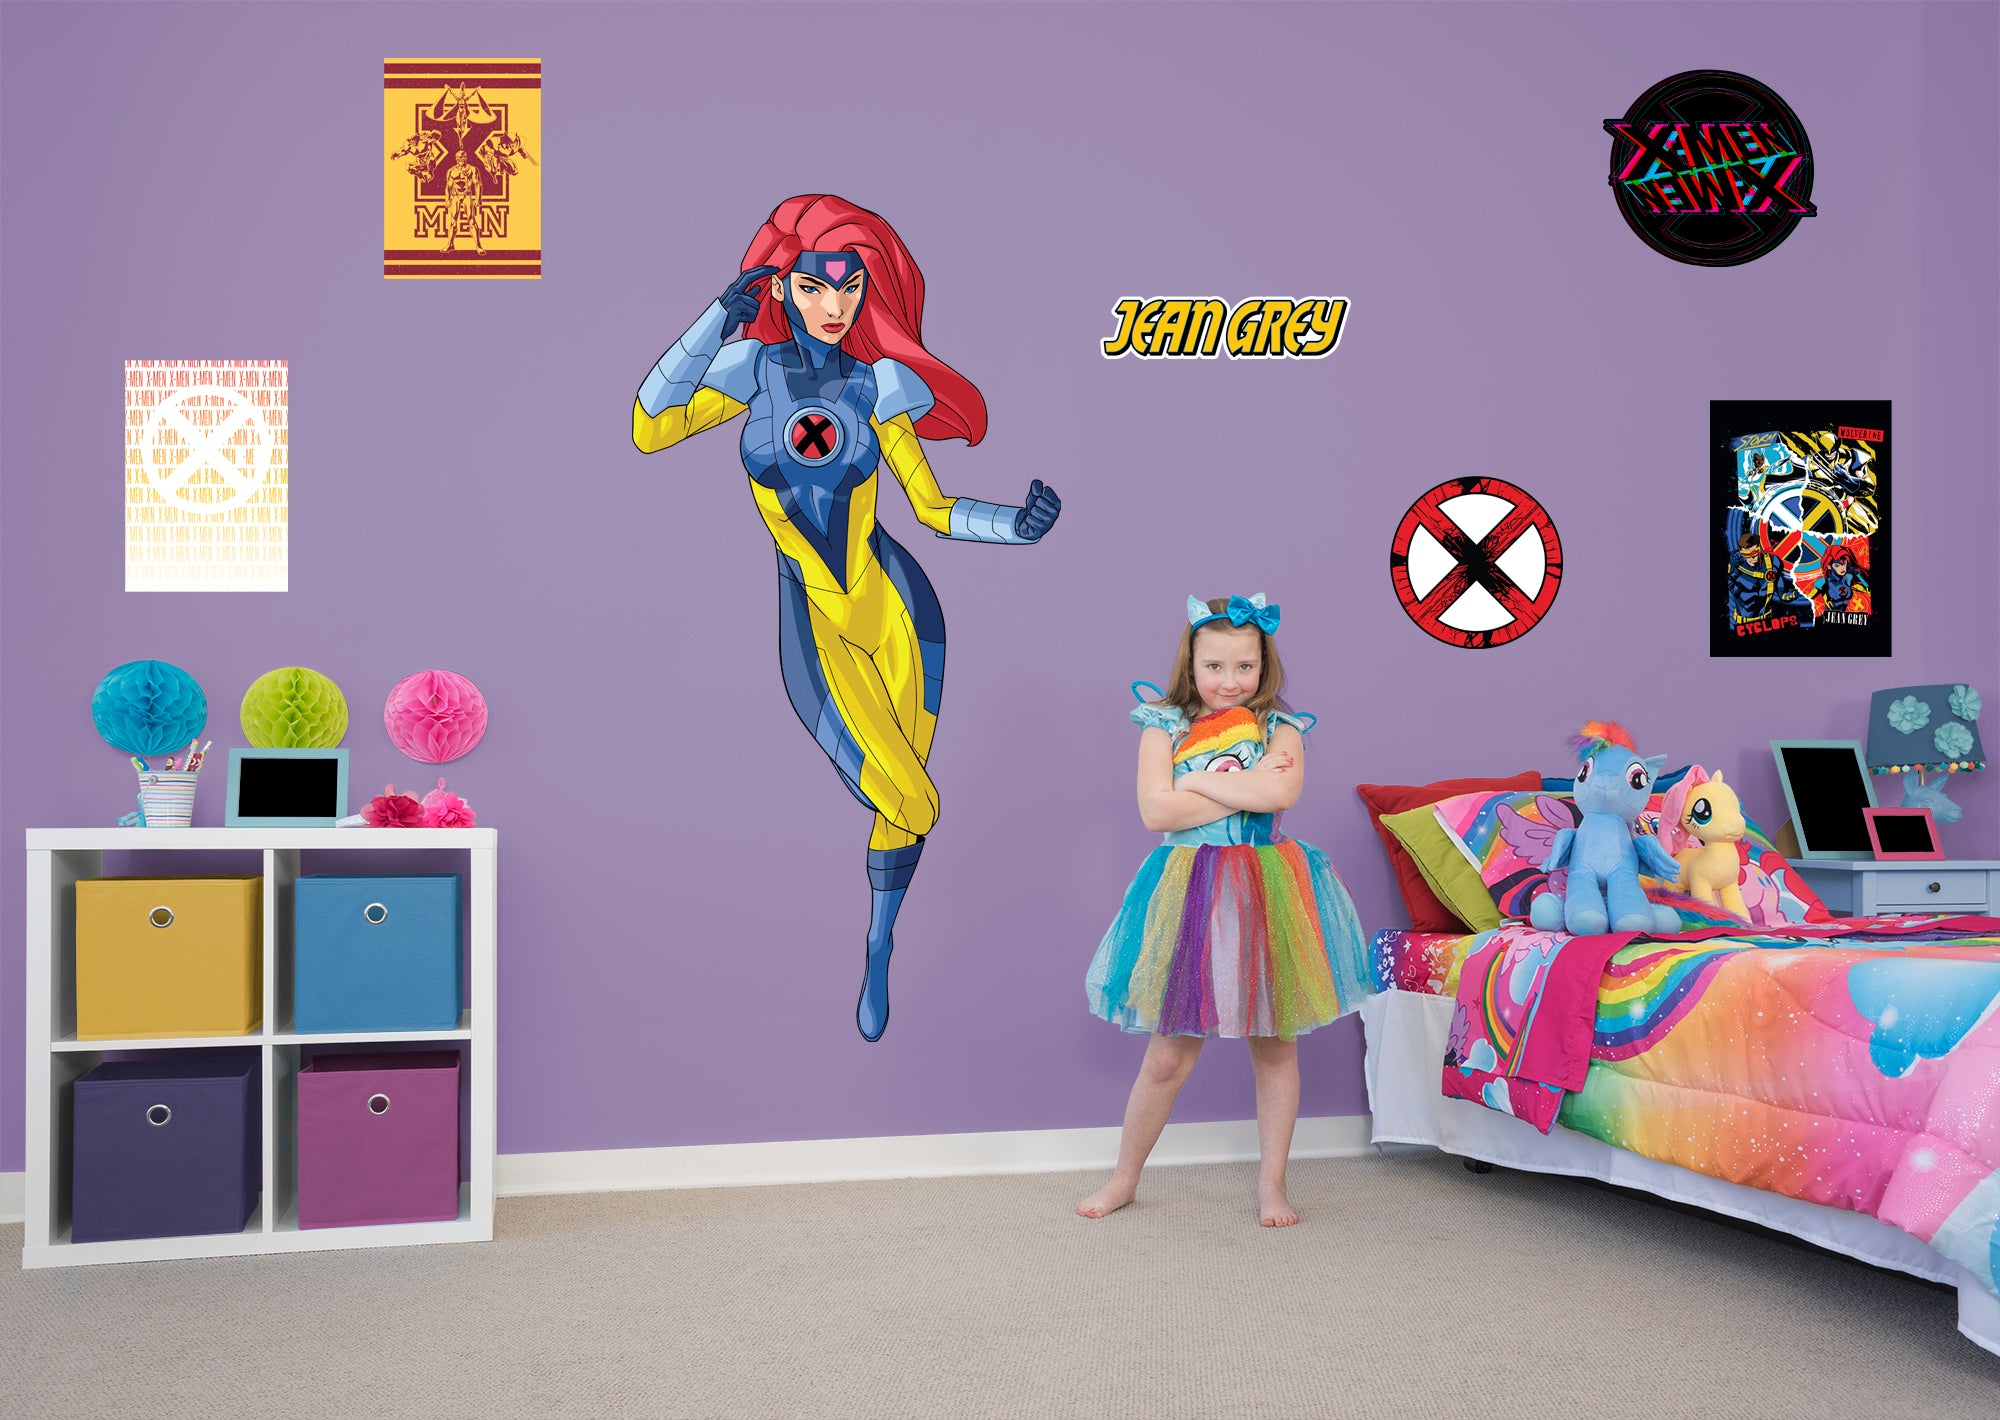 X-Men Jean Grey RealBig - Officially Licensed Marvel Removable Wall Decal Life-Size Character + 5 Decals (39"W x 78"H) by Fathea